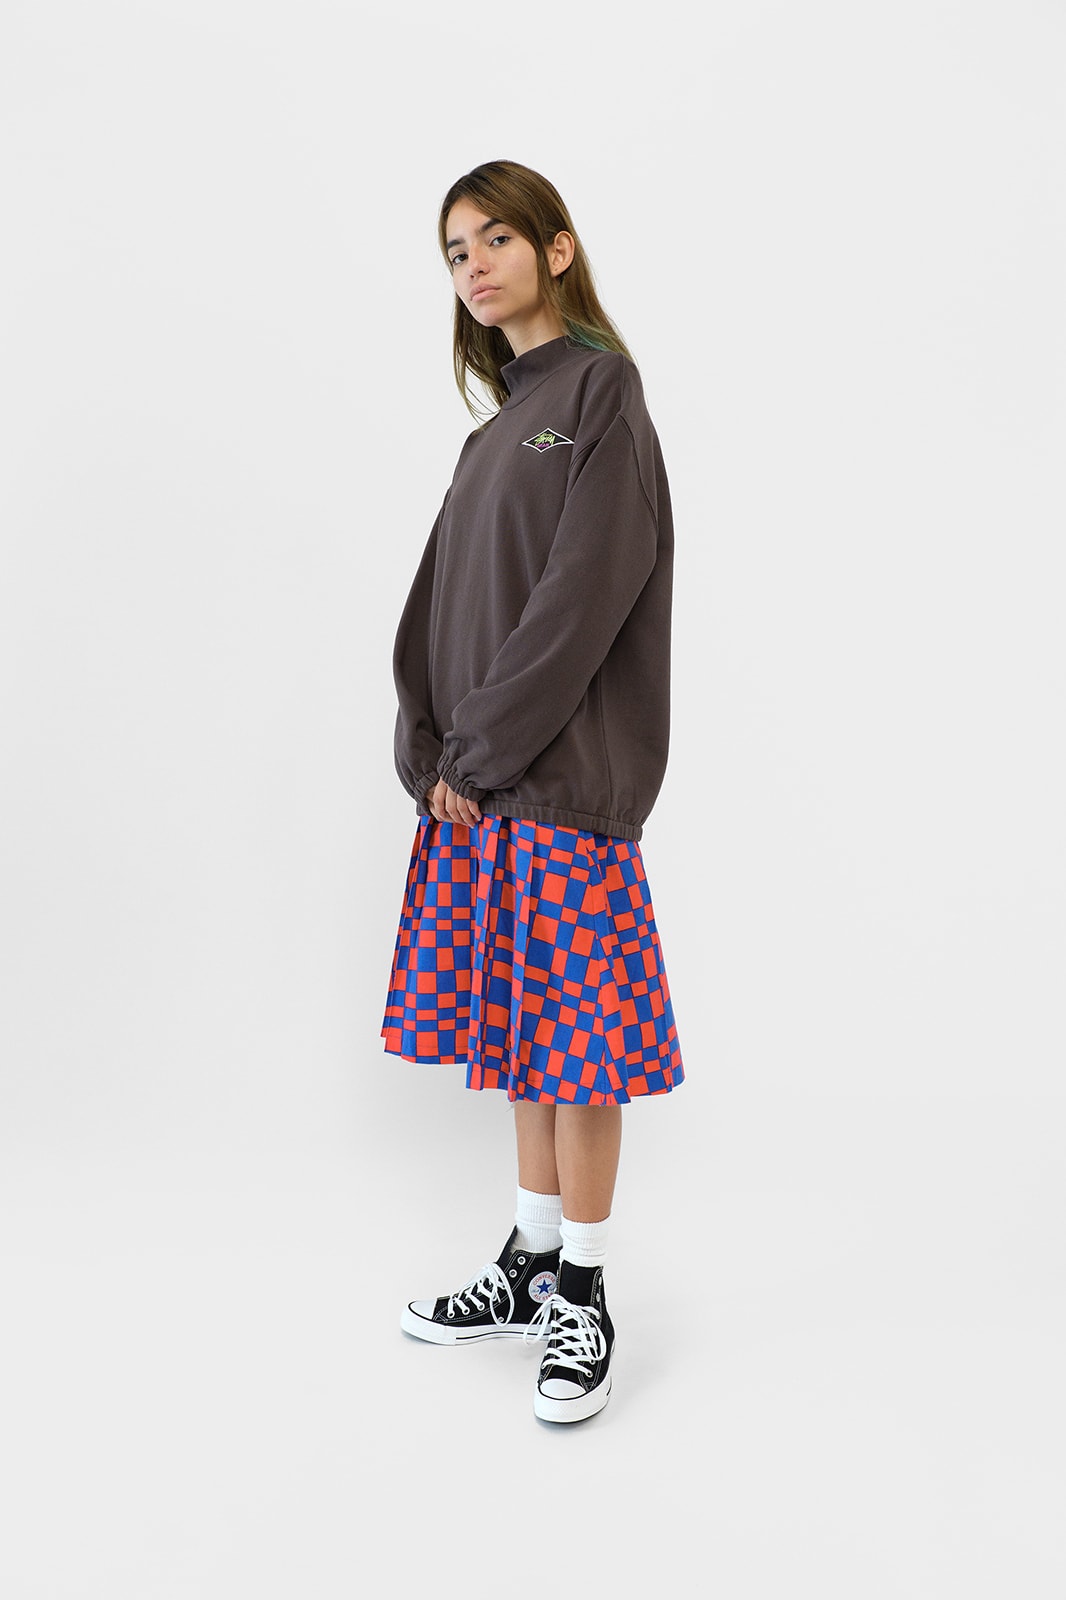 Stussy Womens Fall Winter 2019 Collection Lookbook Jacket Grey Skirt Red Blue